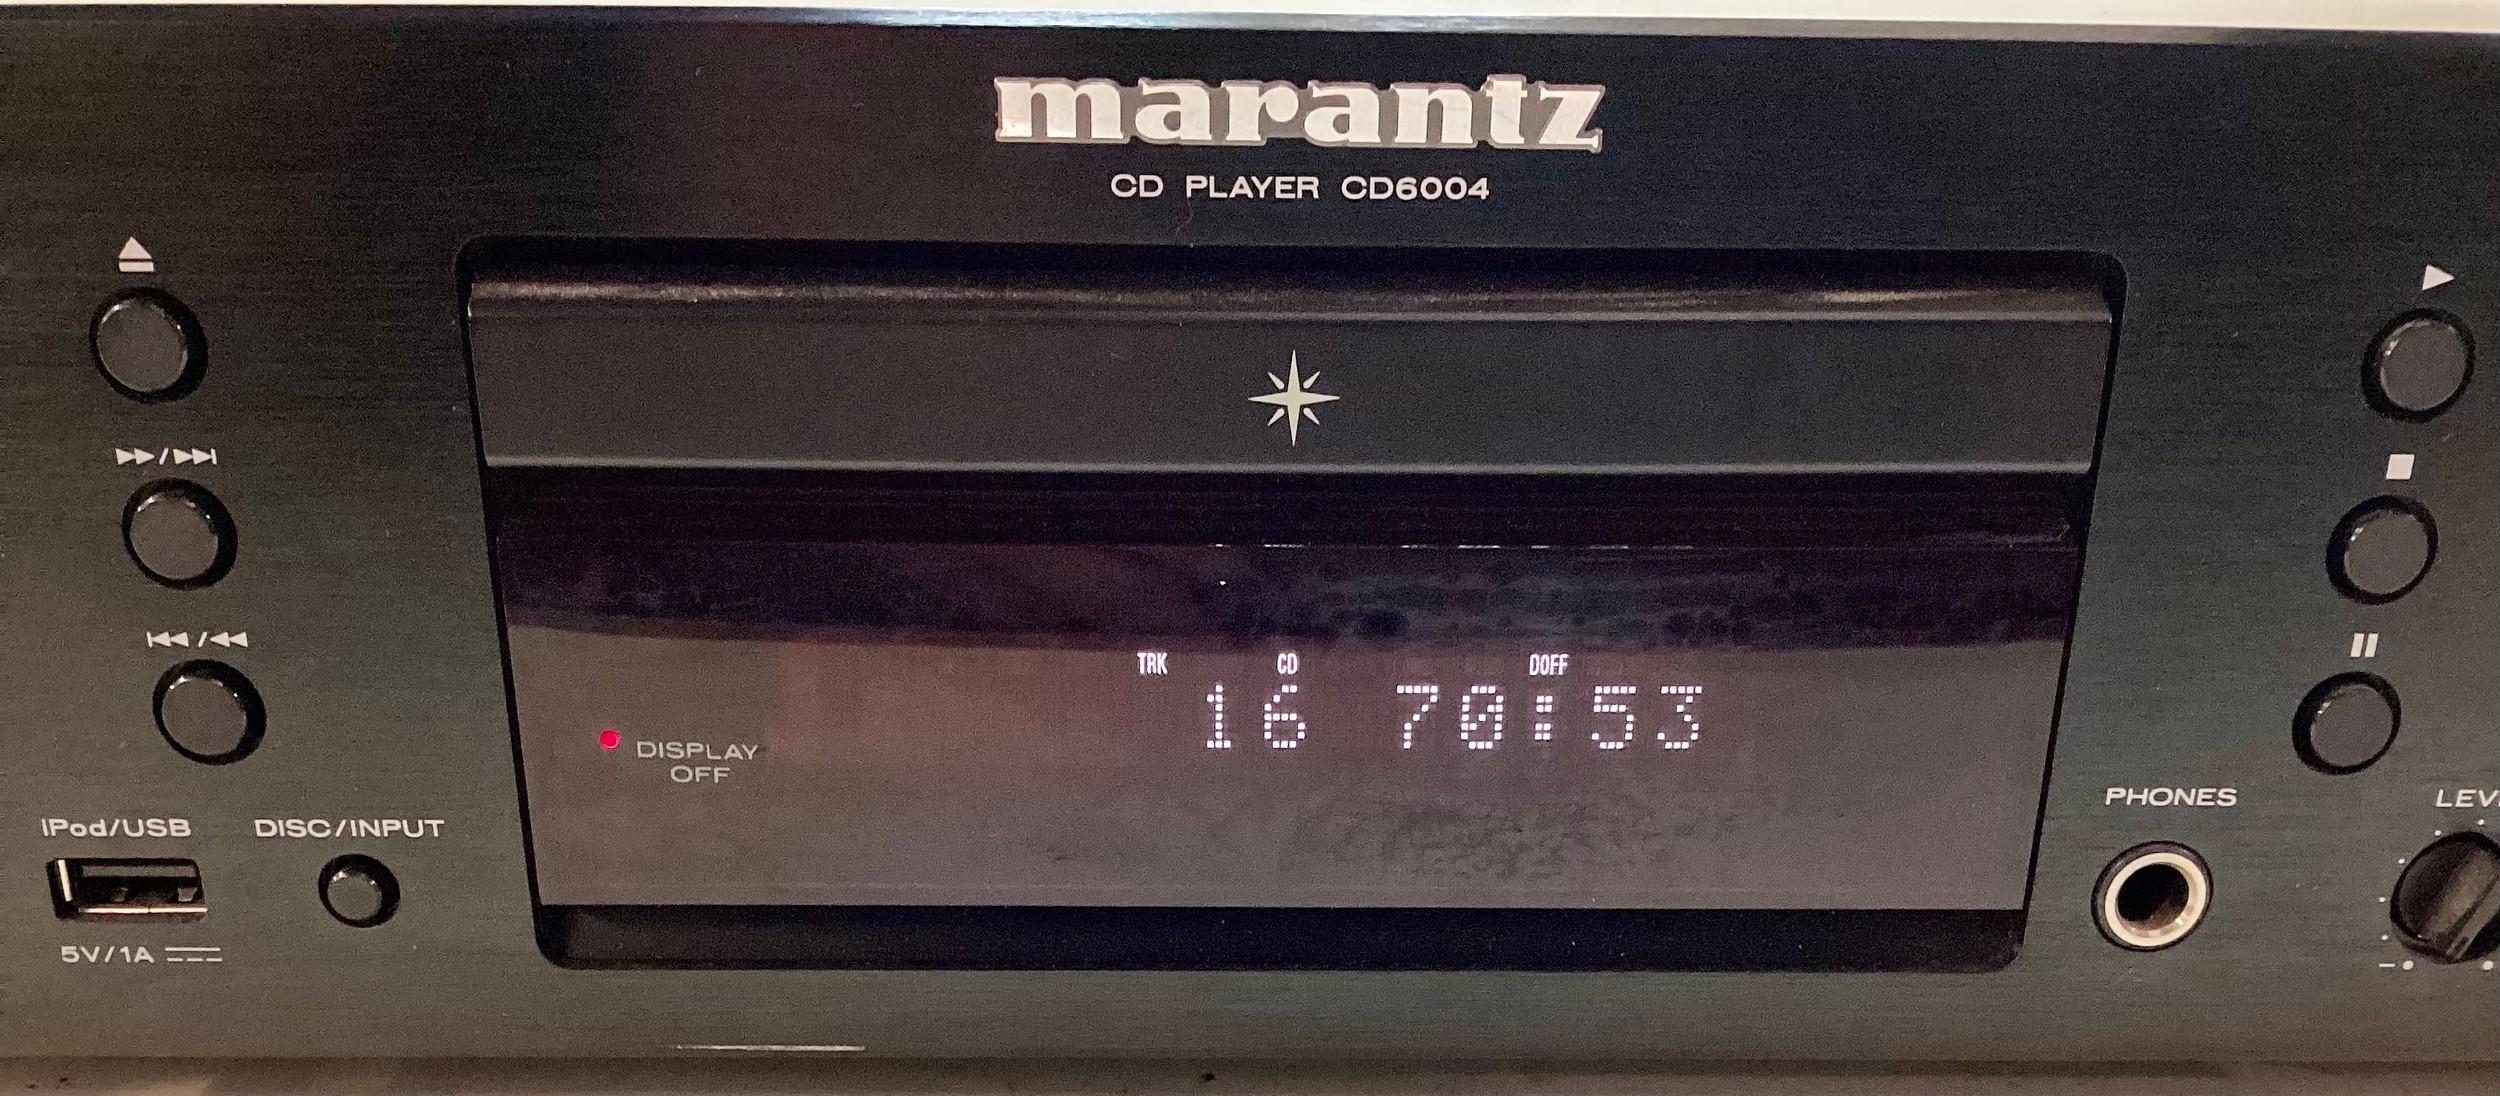 MARANTZ COMPACT DISC PLAYER. Nice condition here with model CD6004 complete with remote. Powers up - Image 2 of 4